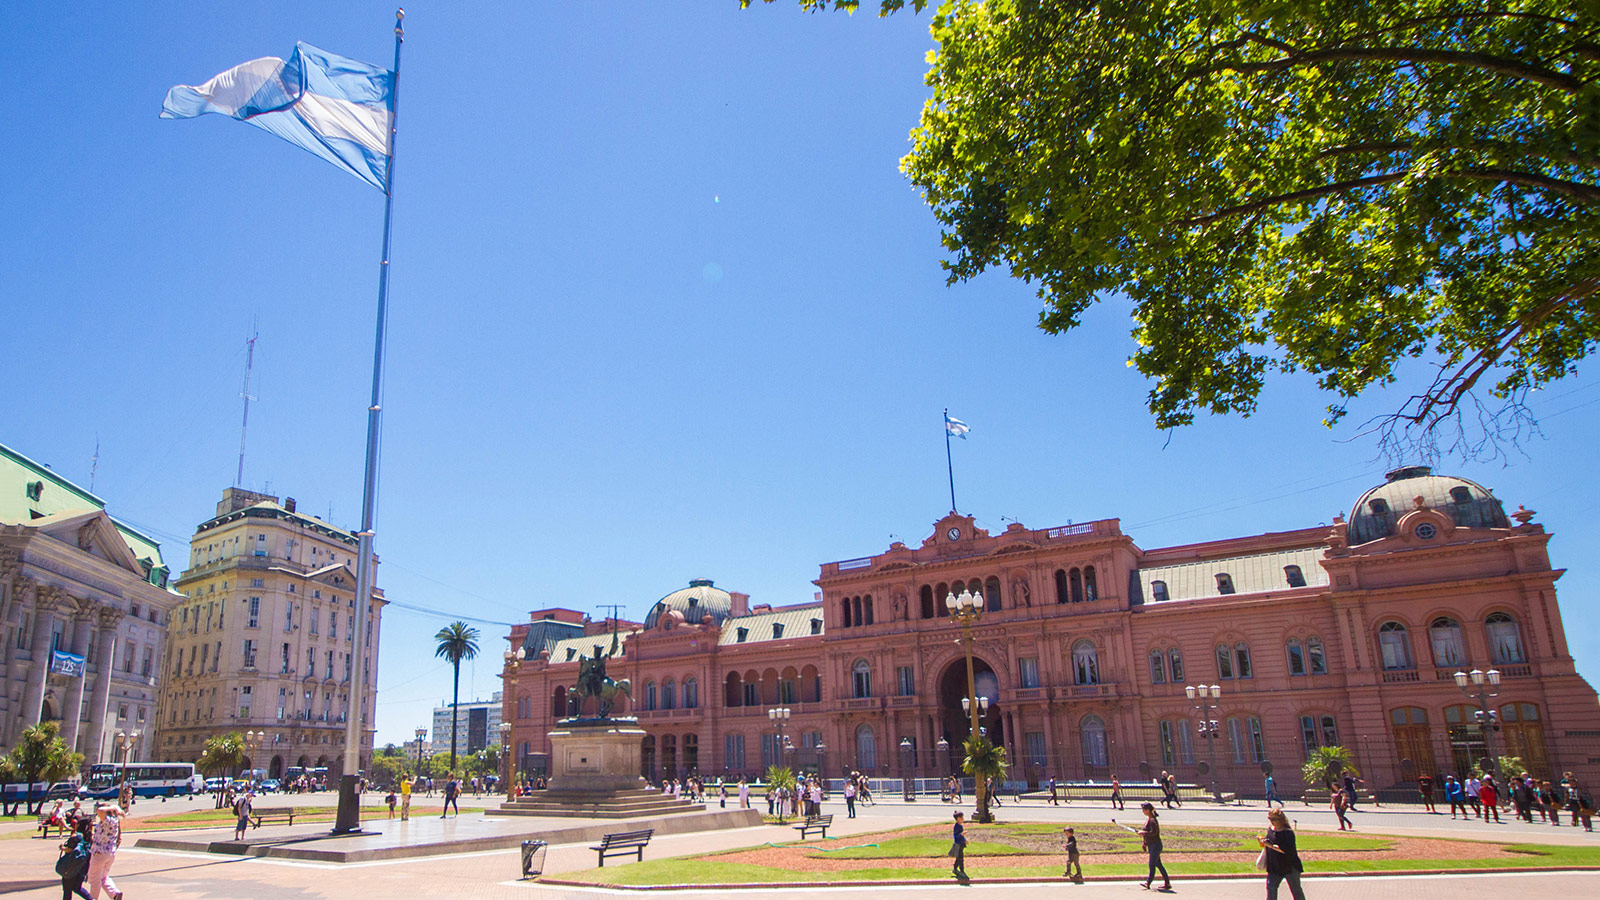 Casa Rosada in Plaza de Mayo is one of our Buenos Aires highlights.